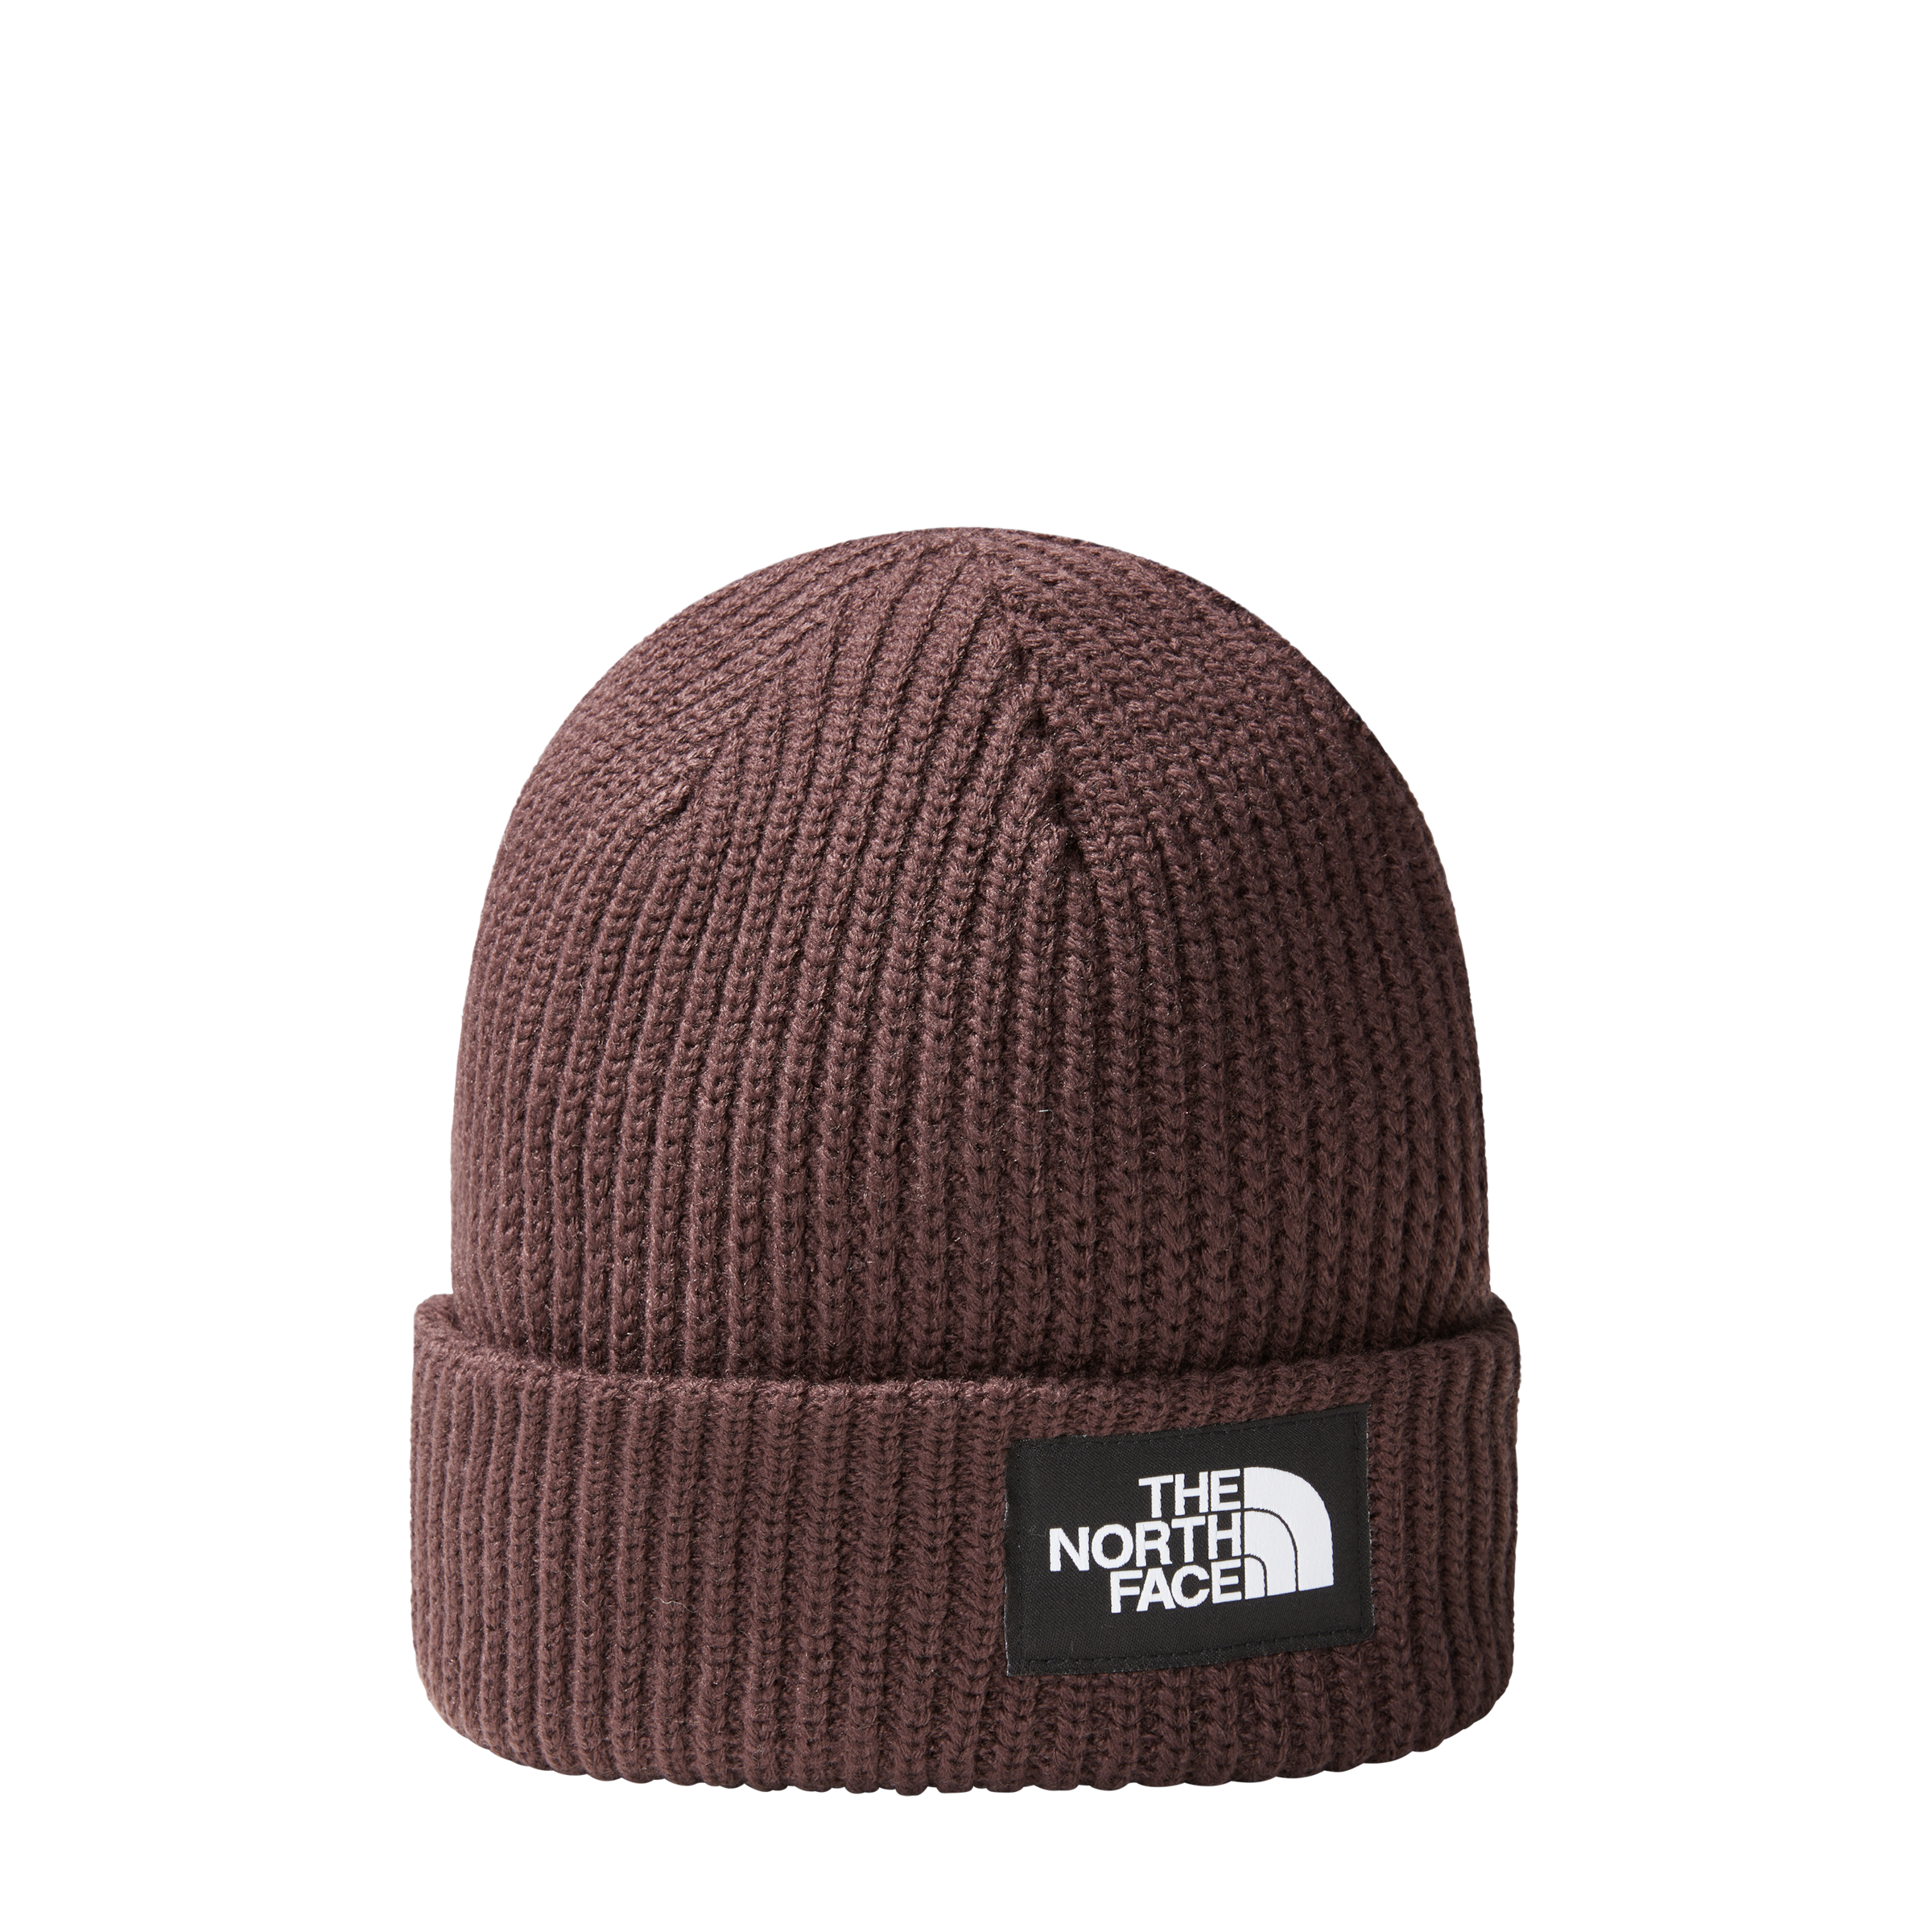 The North Face Beanie »SALTY DOG LINED BEANIE«, mit Logolabel